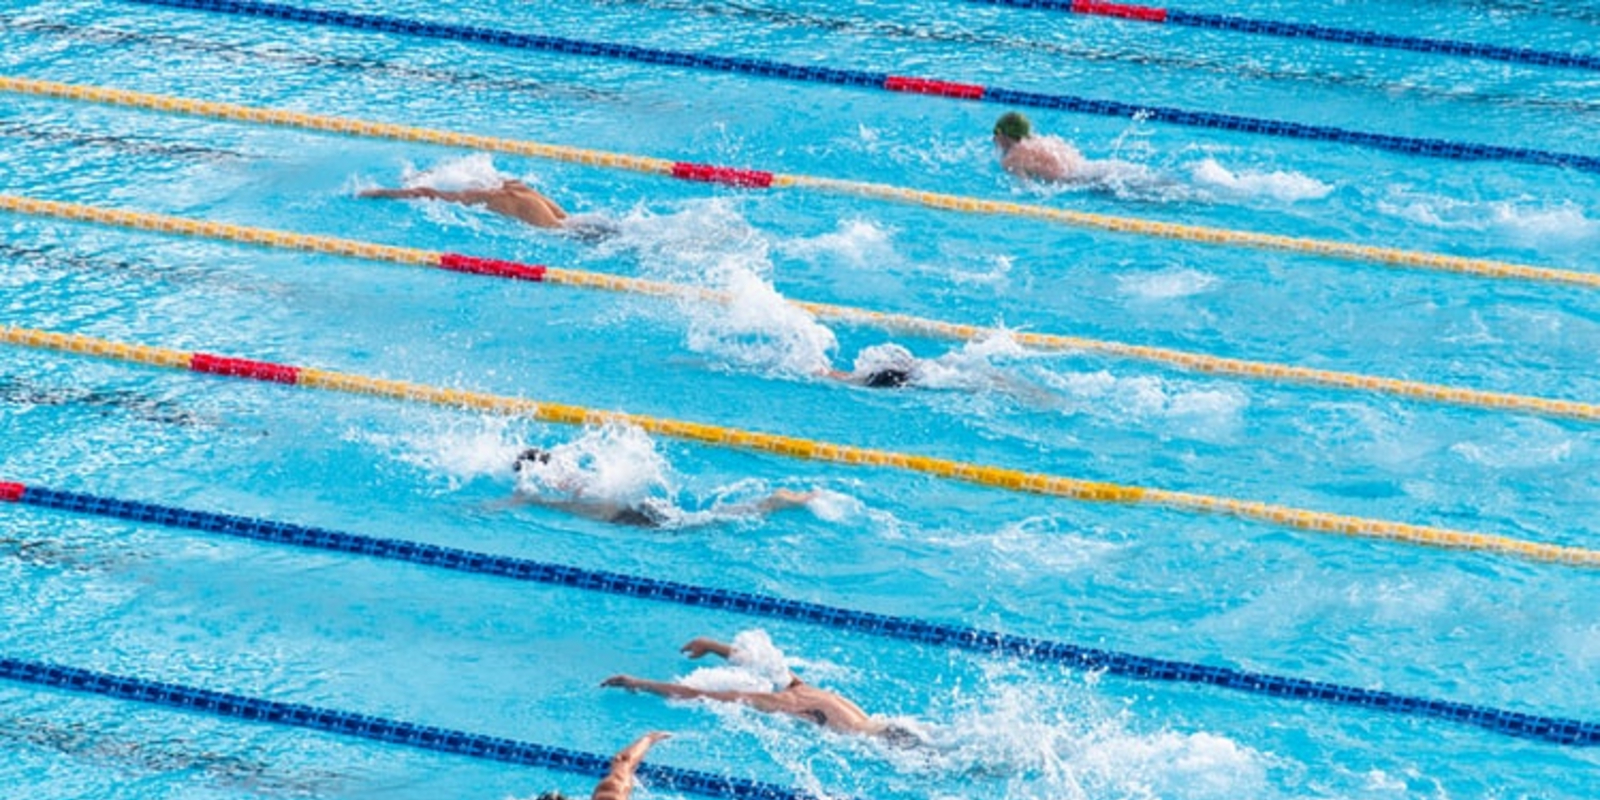 Coach McKeever: Unorthodox Leadership Lessons from the Pool